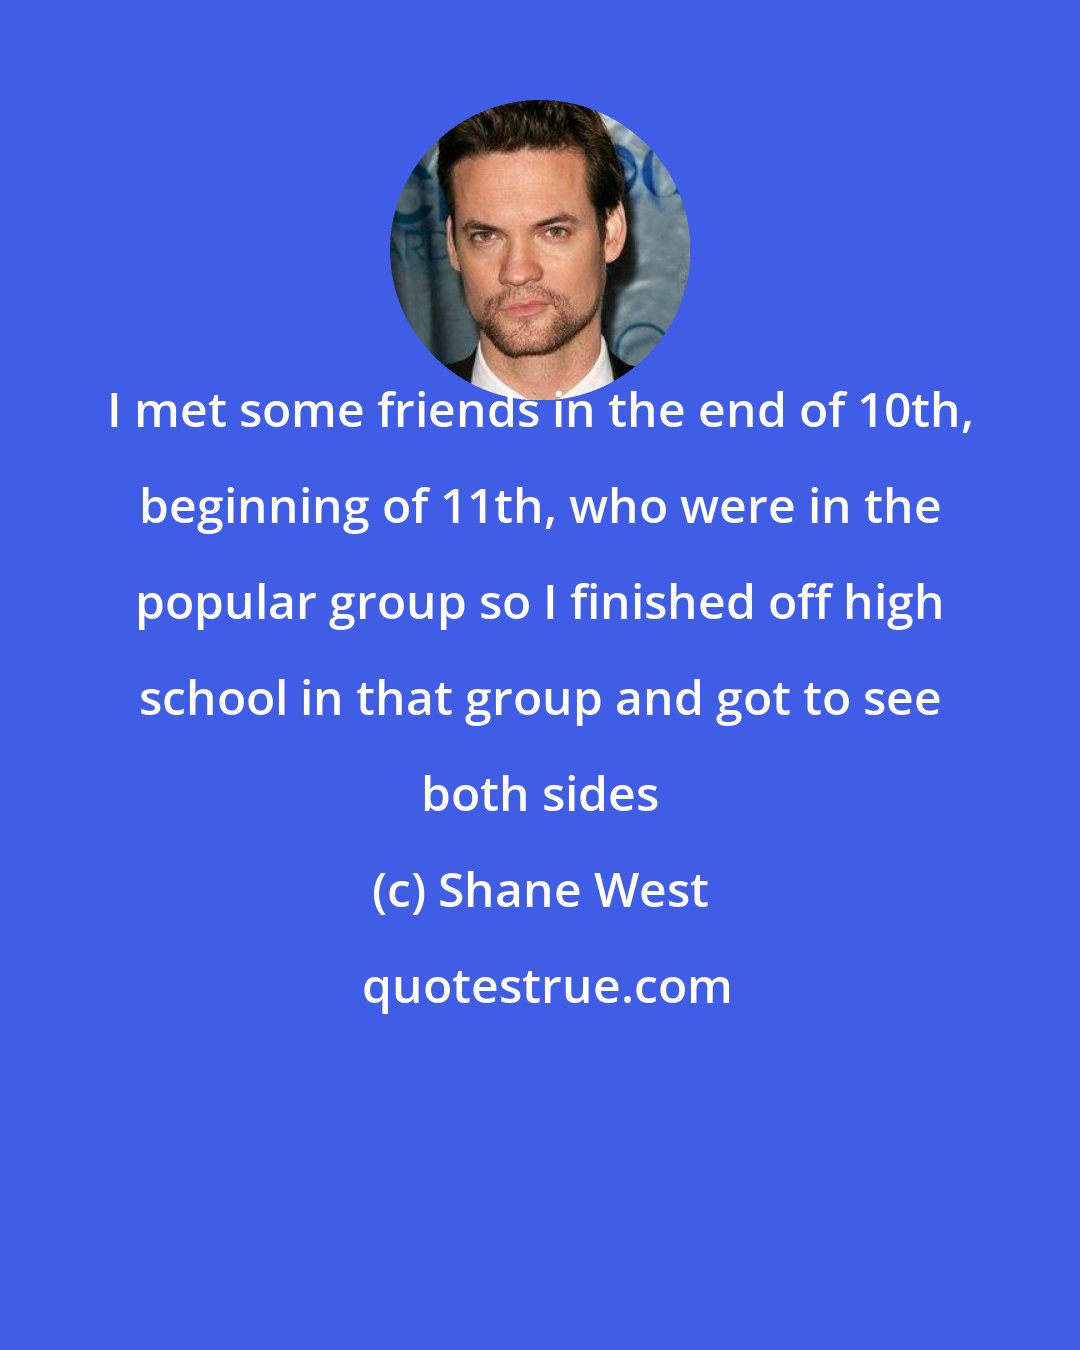 Shane West: I met some friends in the end of 10th, beginning of 11th, who were in the popular group so I finished off high school in that group and got to see both sides